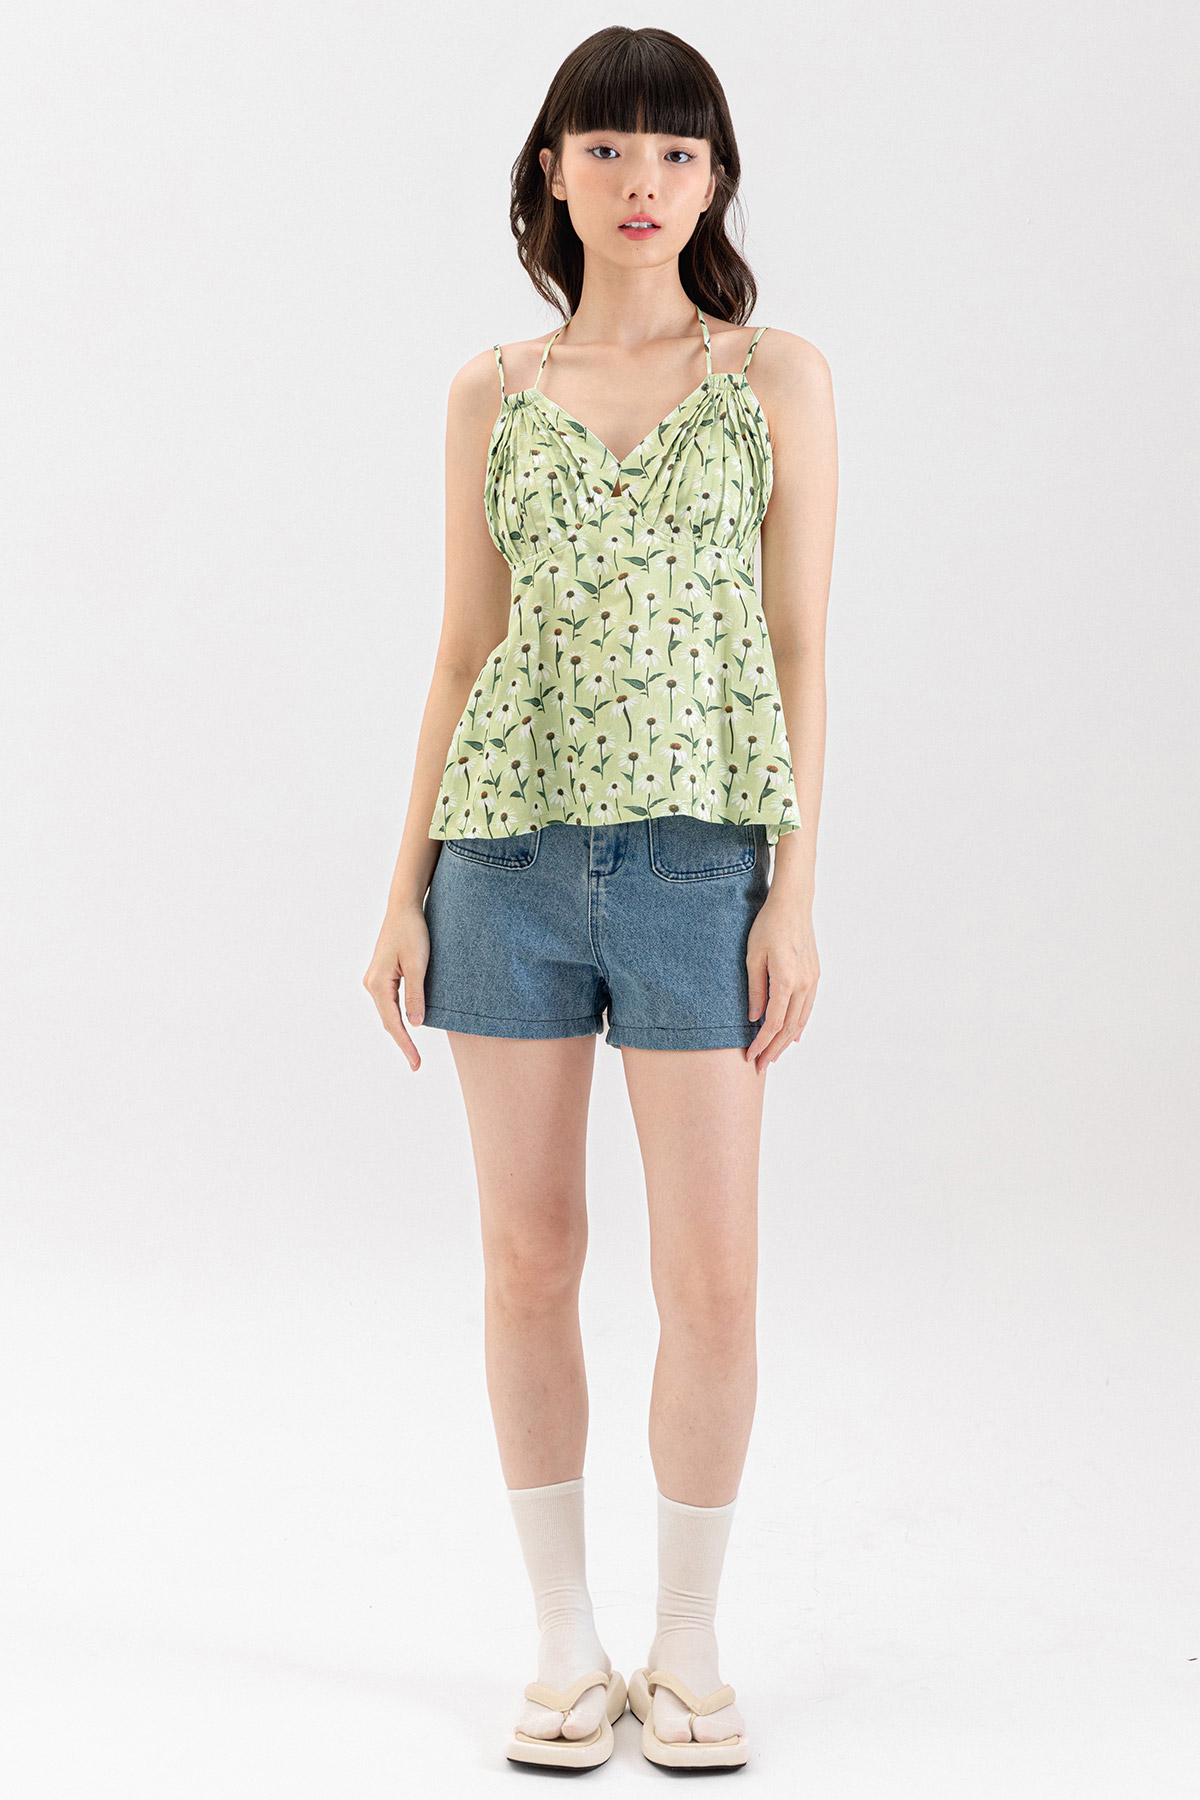 DAFNE PADDED TOP - SPRING FIELD [BY MODPARADE]